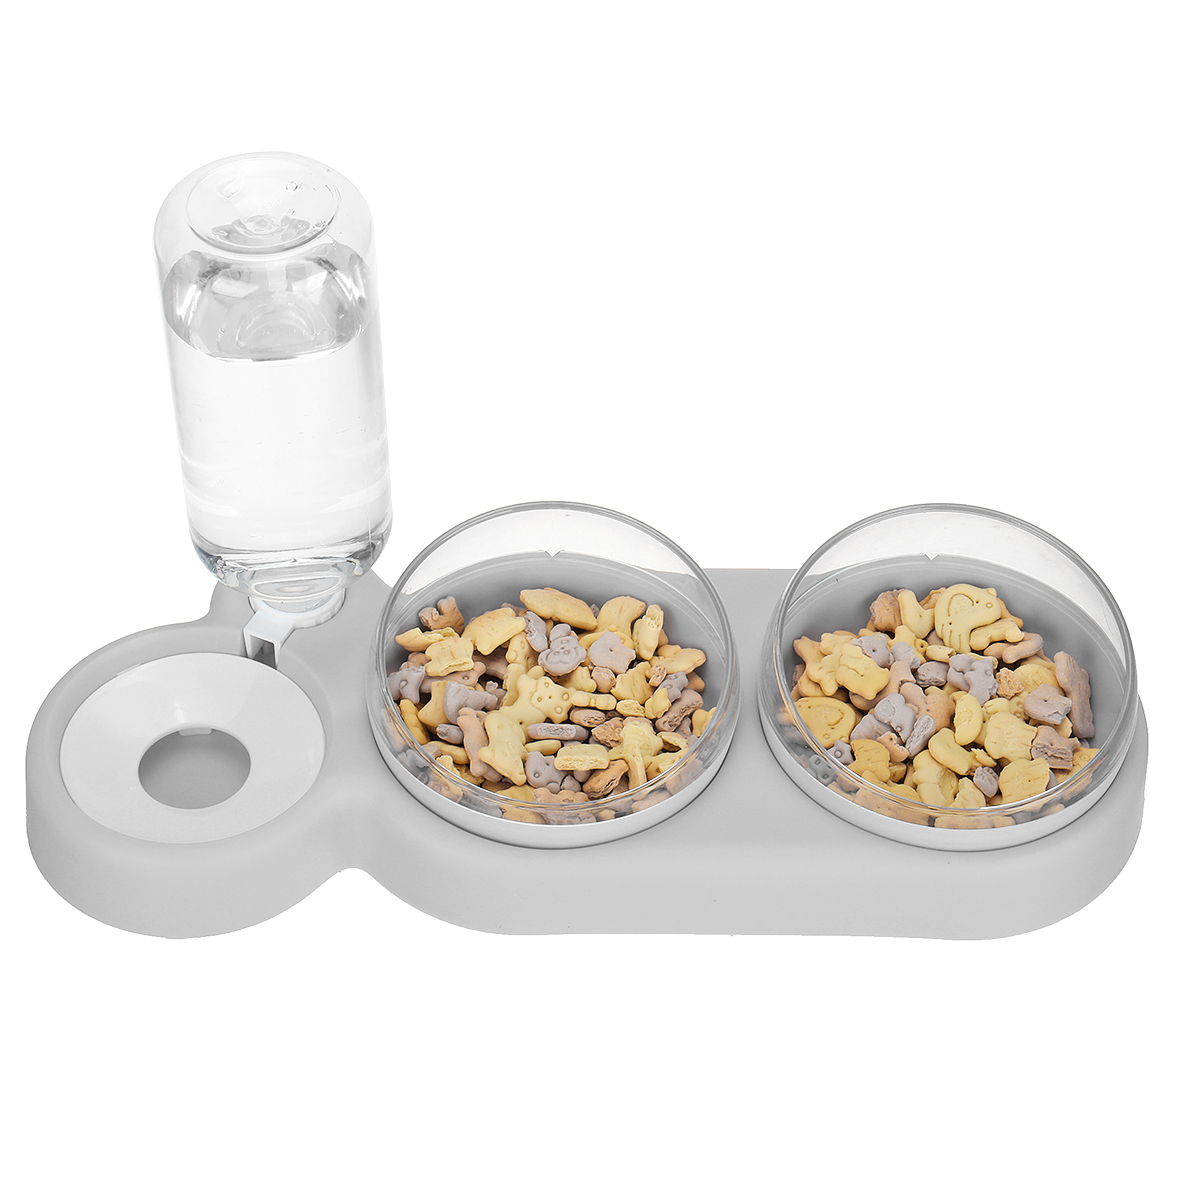 Three-bowl-Design-Pet-Feeder-Dry-and-Wet-Separation-15-Degree-Tilt-Automatic-Anti-wetting-Large-Capa-1852271-29